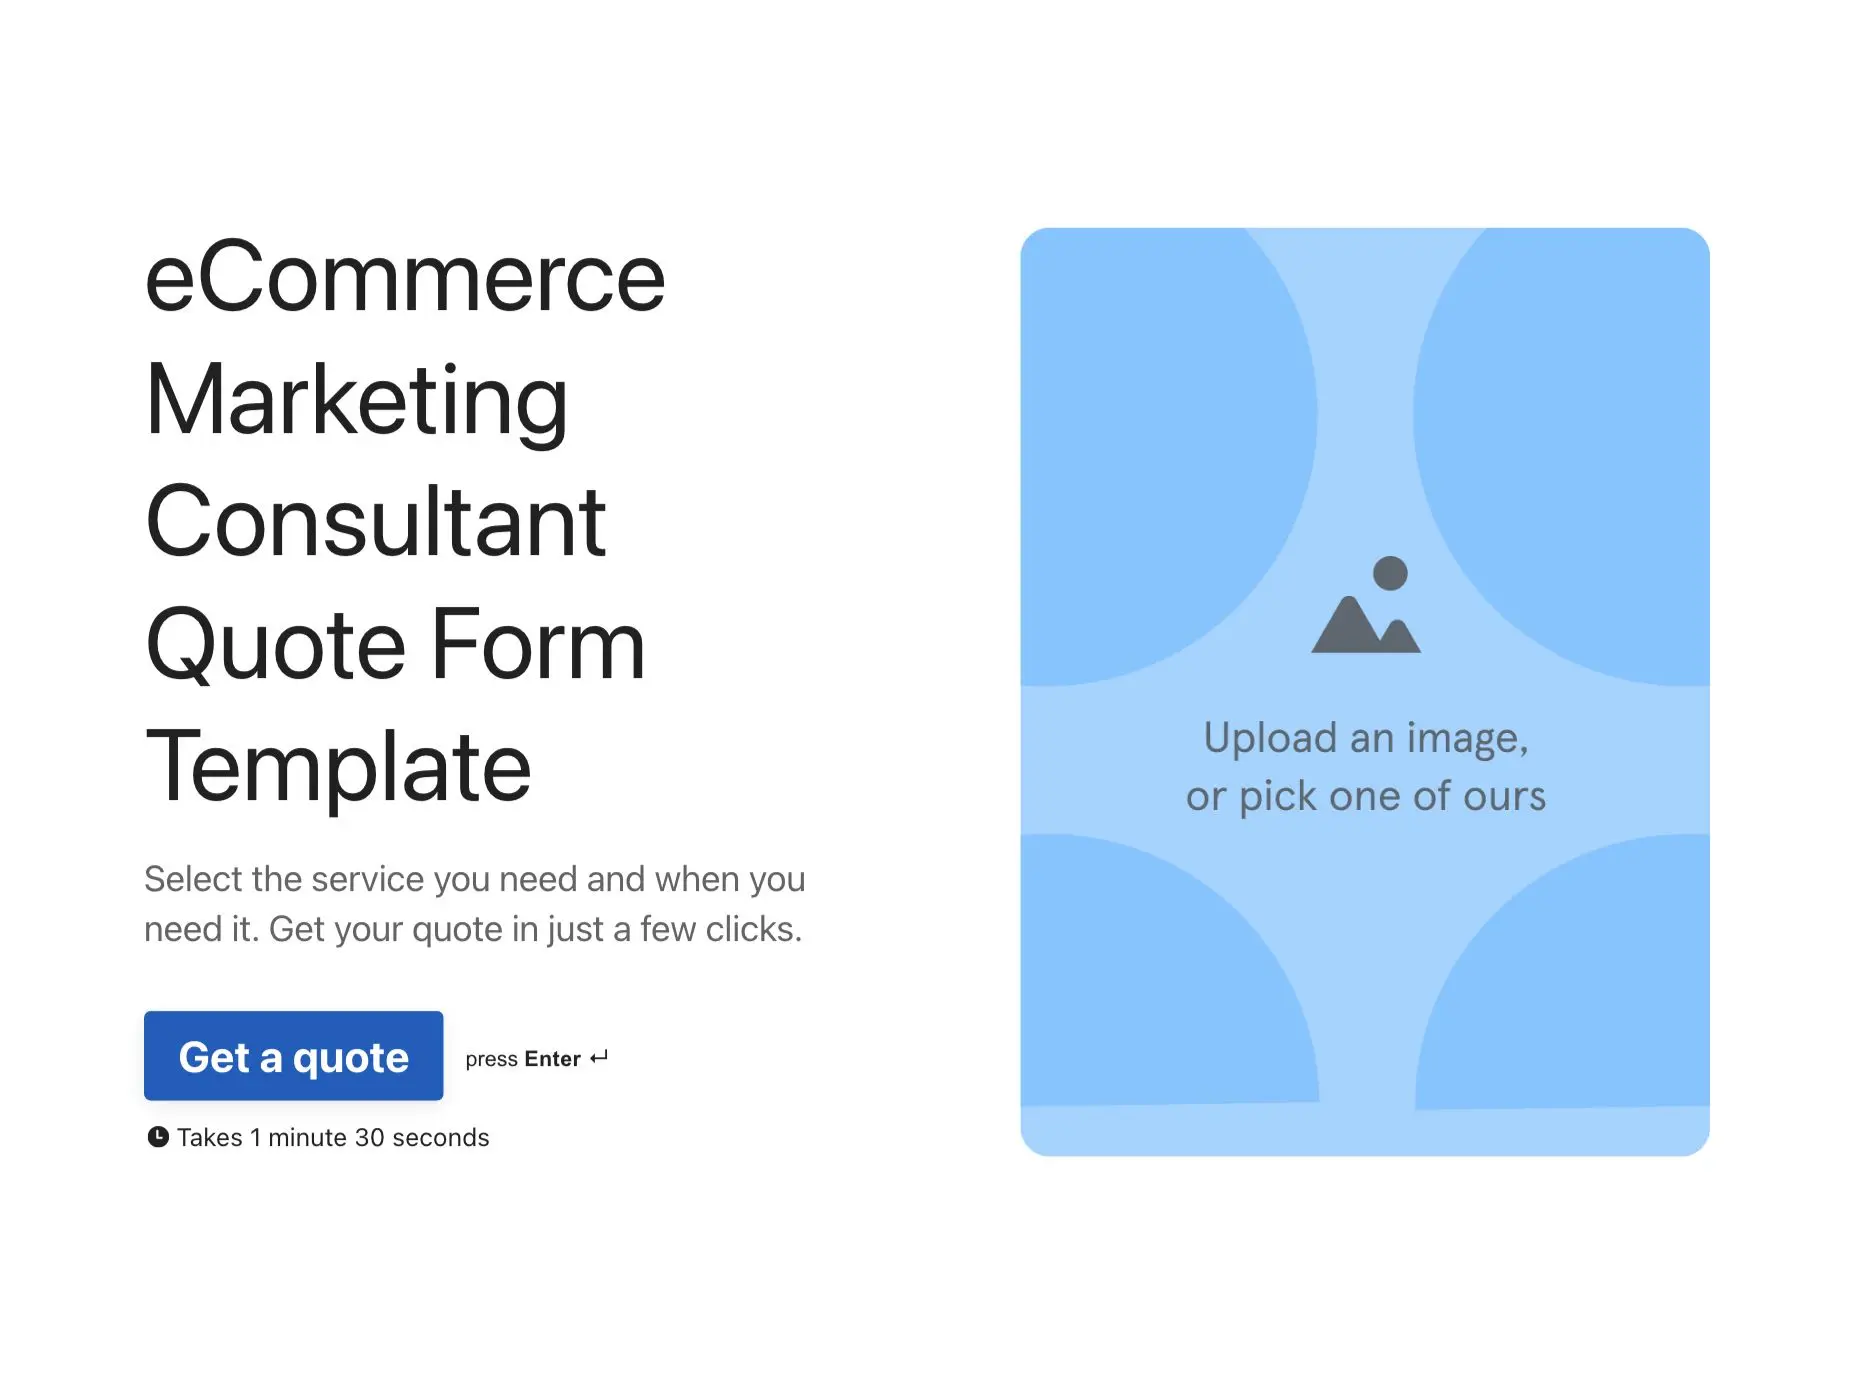 eCommerce Marketing Consultant Quote Form Template Hero